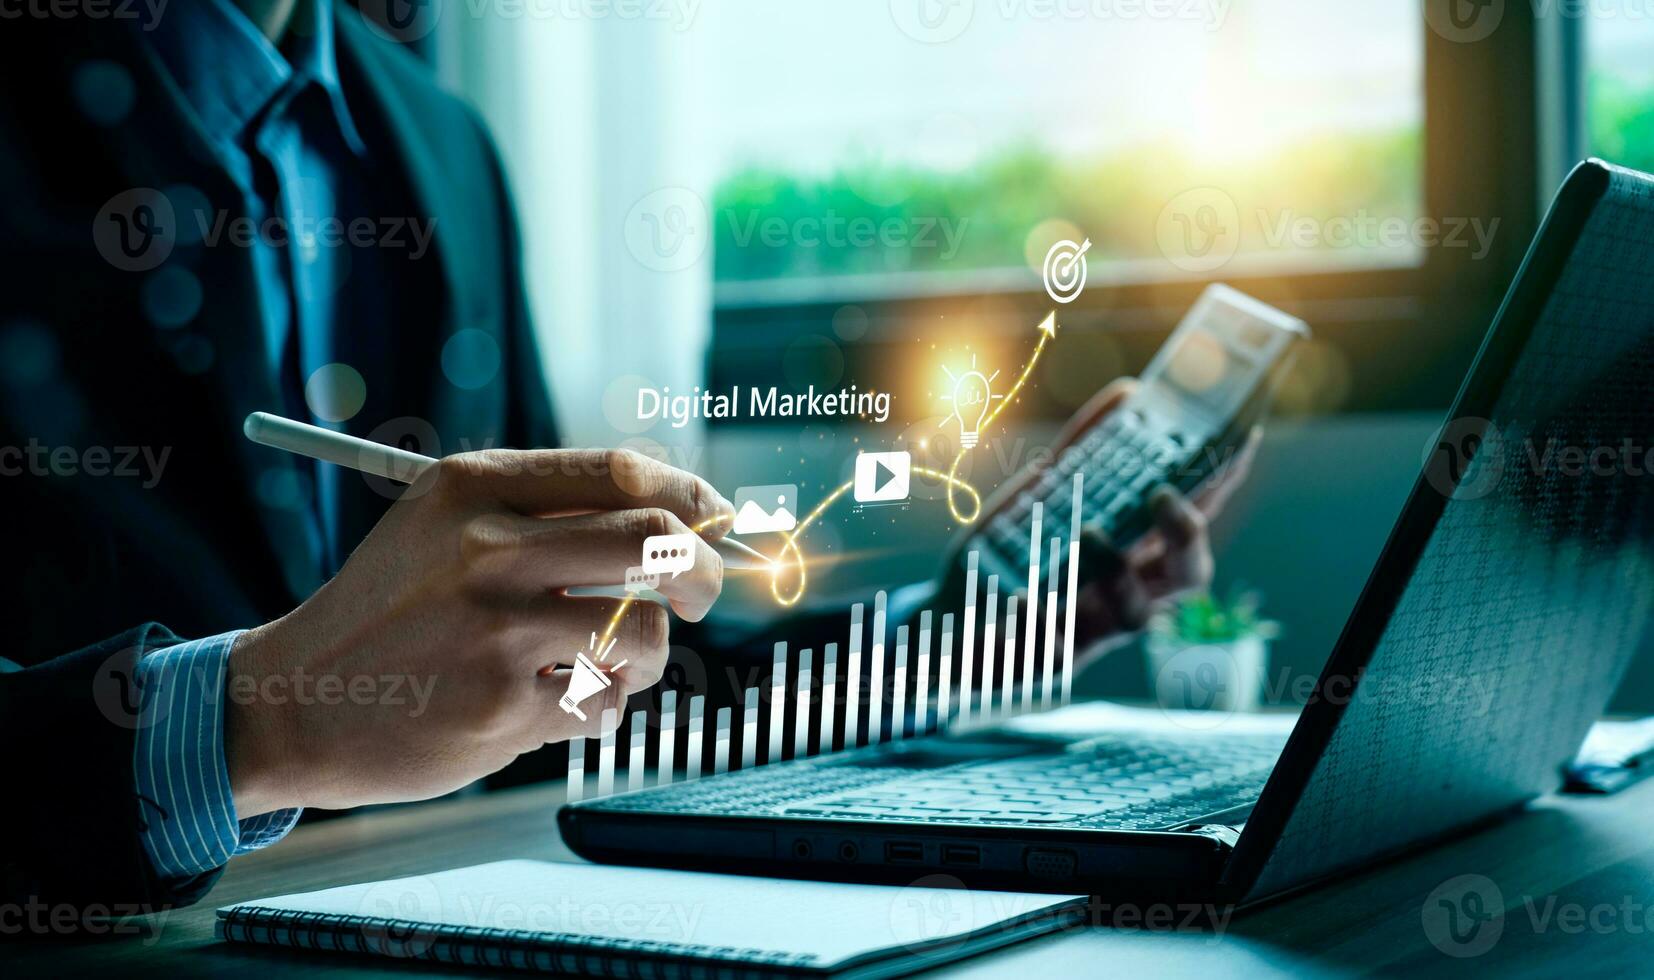 Digital marketing commerce online sale concept, Promotion of products or services through digital channels search engine, social media, email, website, Digital Marketing Strategies and Goals. SEO PPC photo